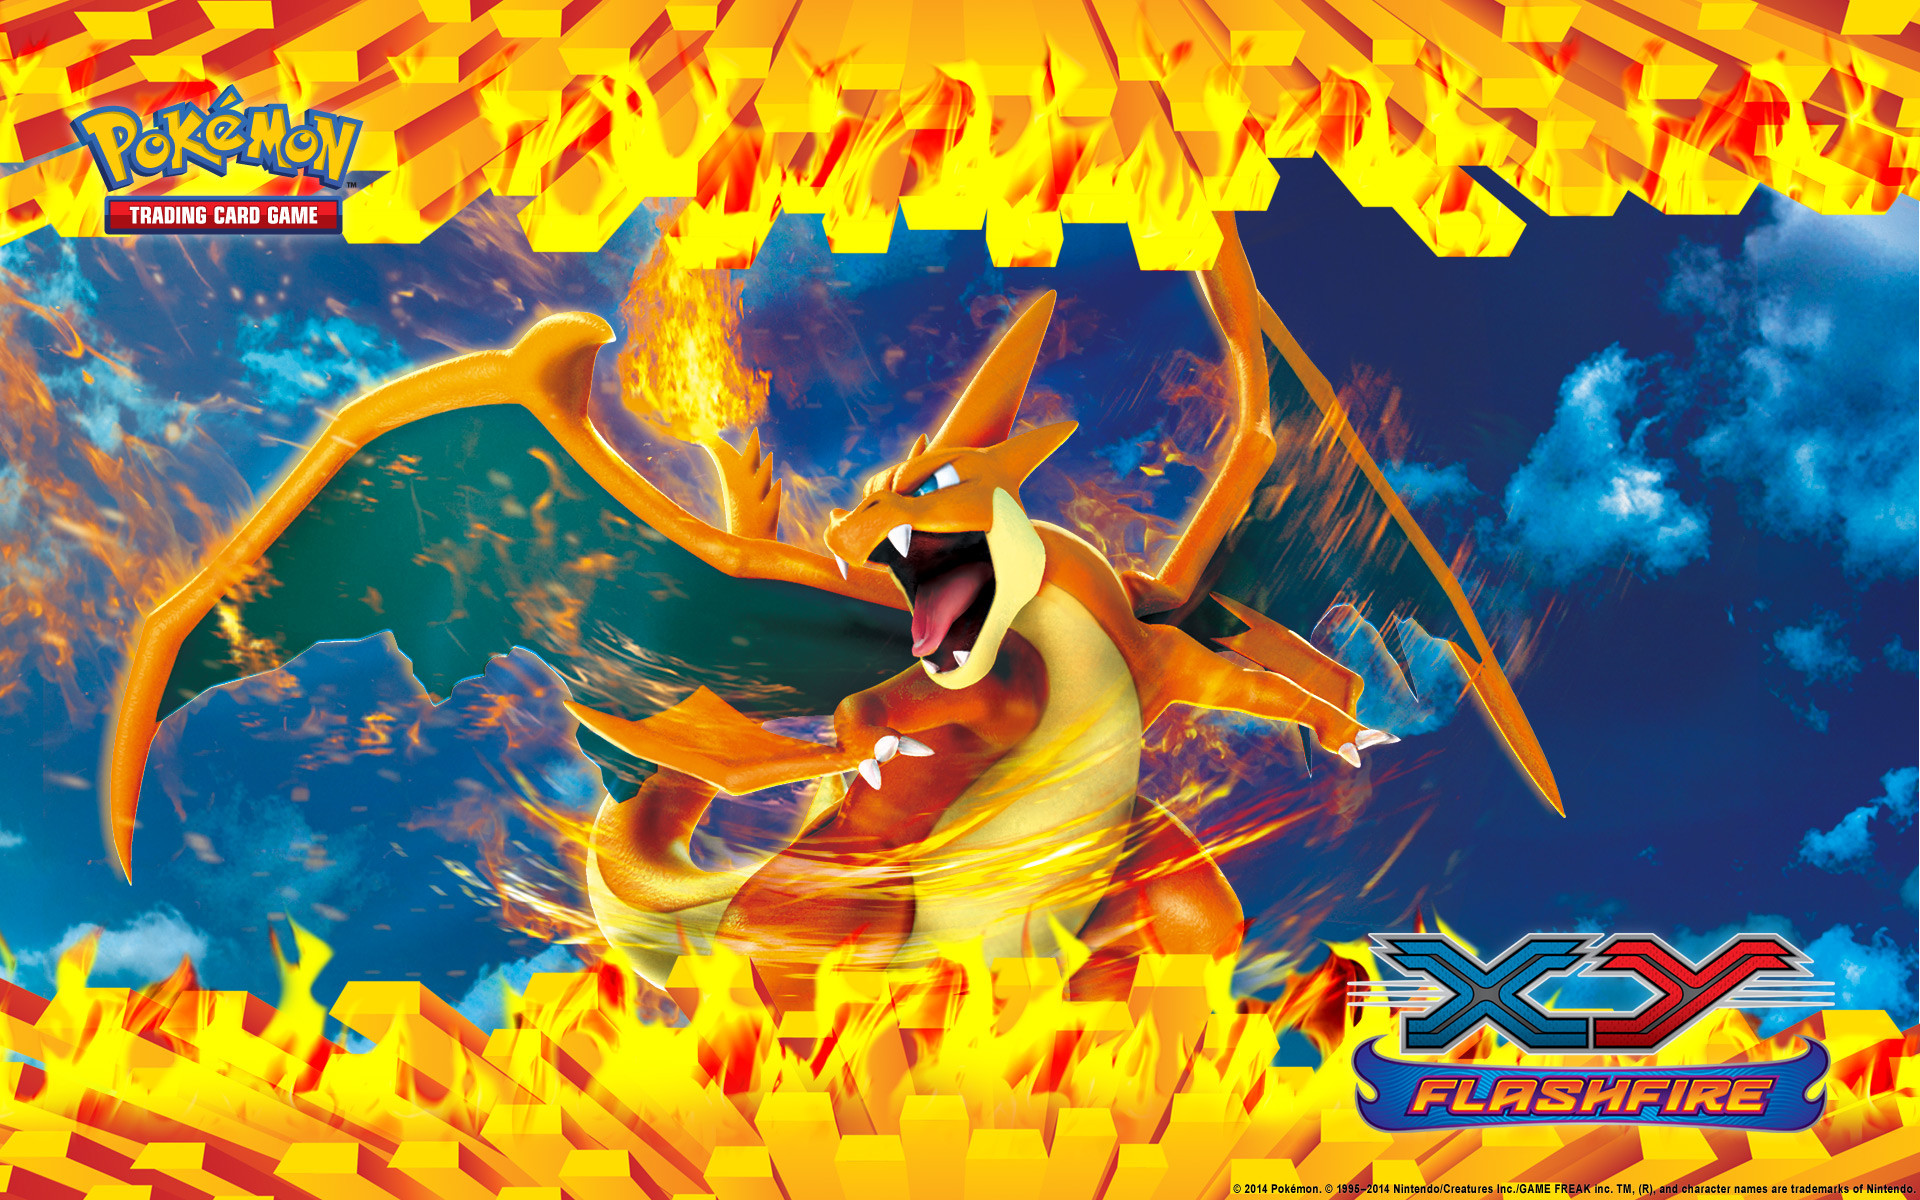 XOW: Pictures of Pokemon HD, Awesome Wallpapers Wallpaper Pokemon Wallpapers )